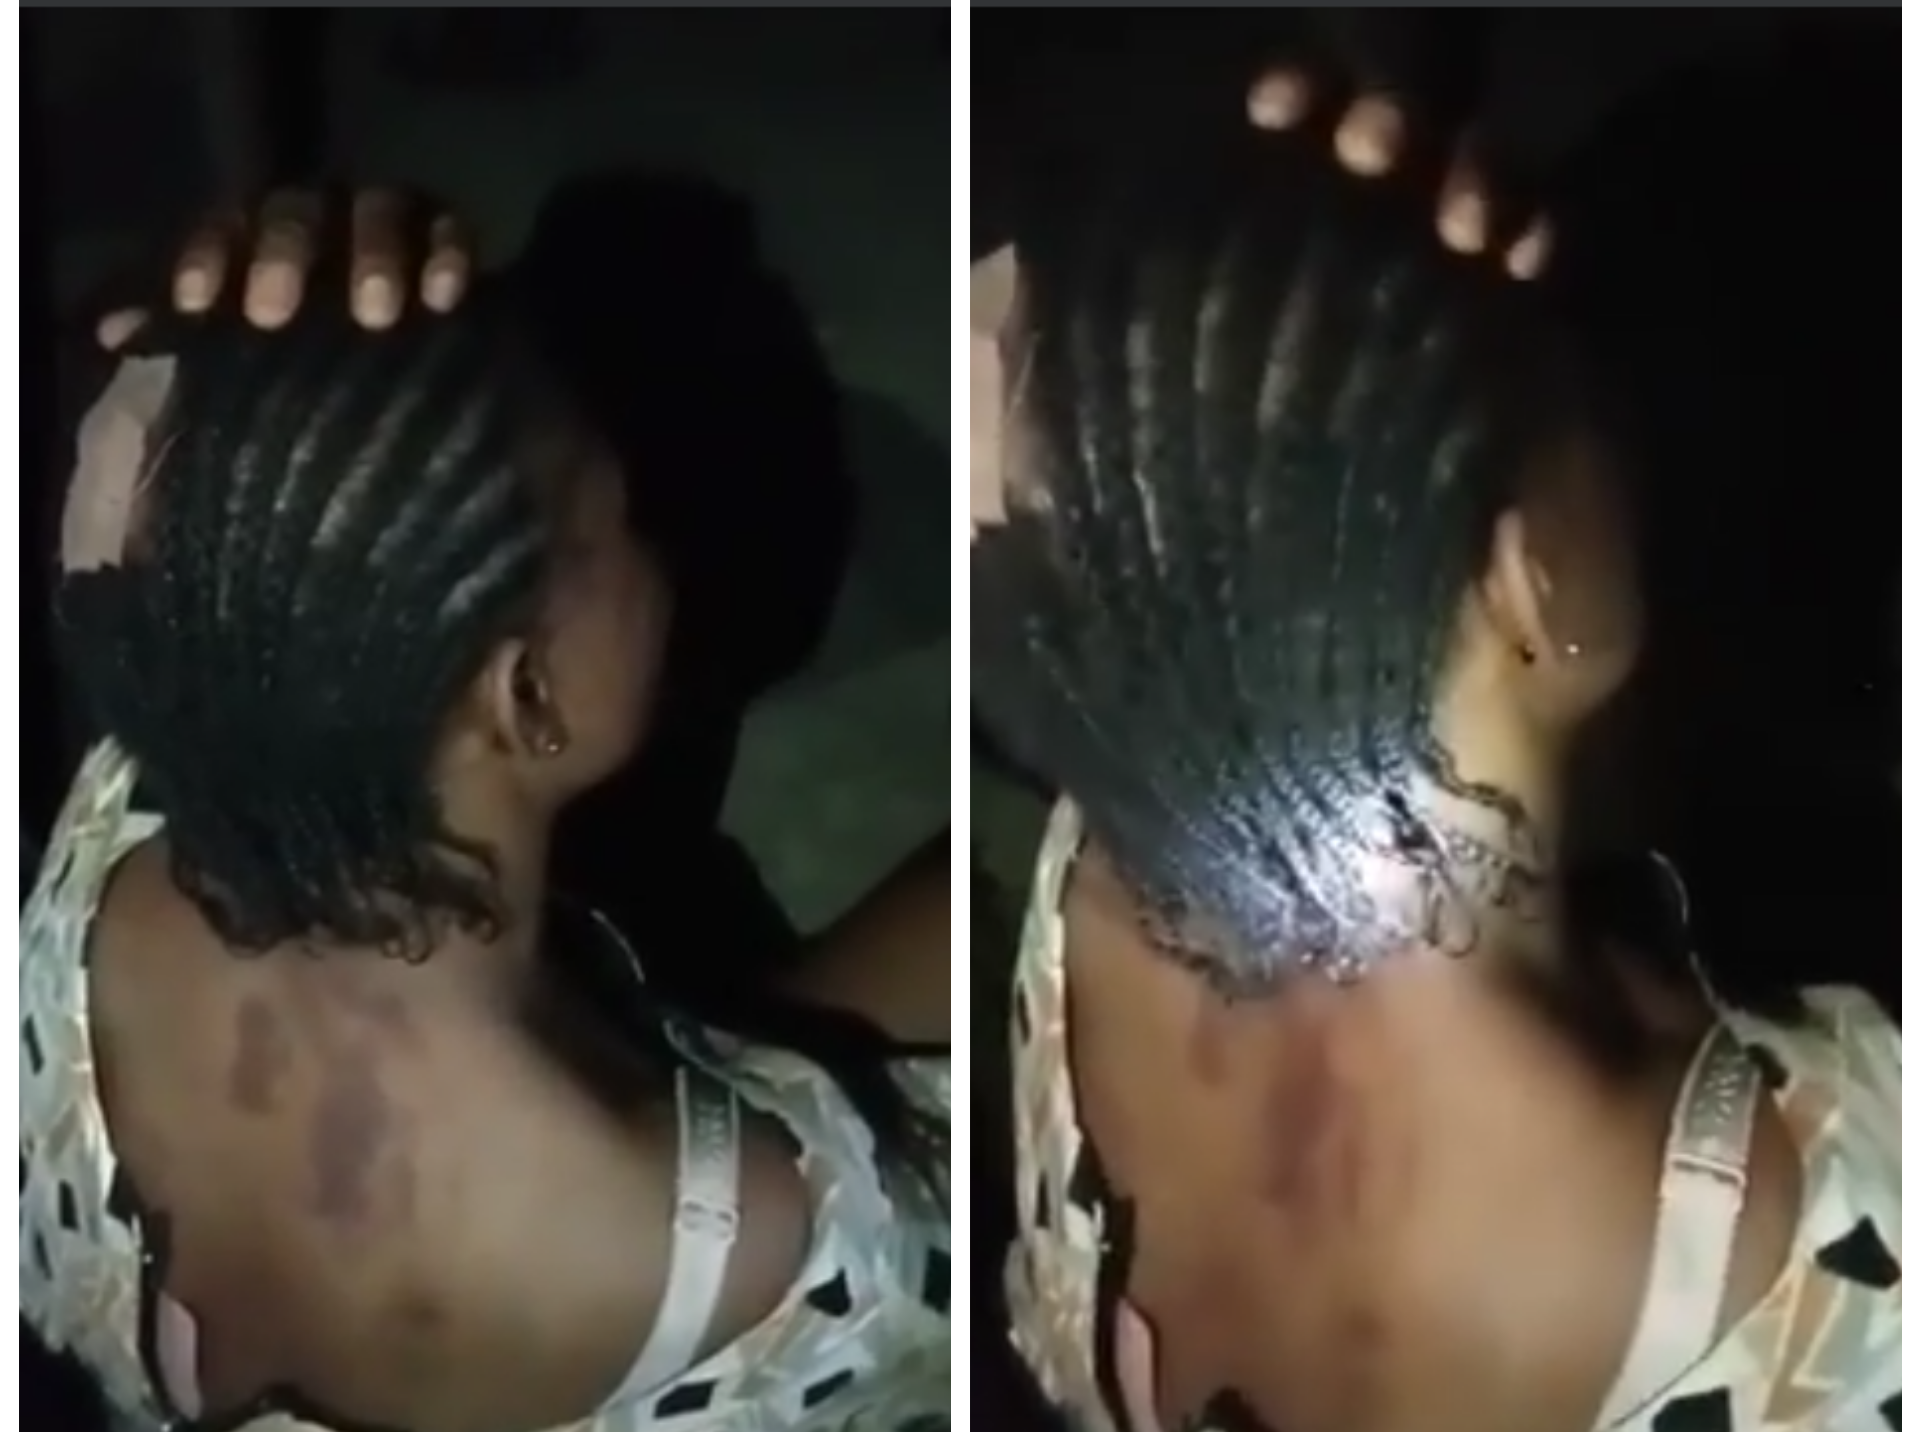 Housekeeper allegedly beaten by her boss in Delta for